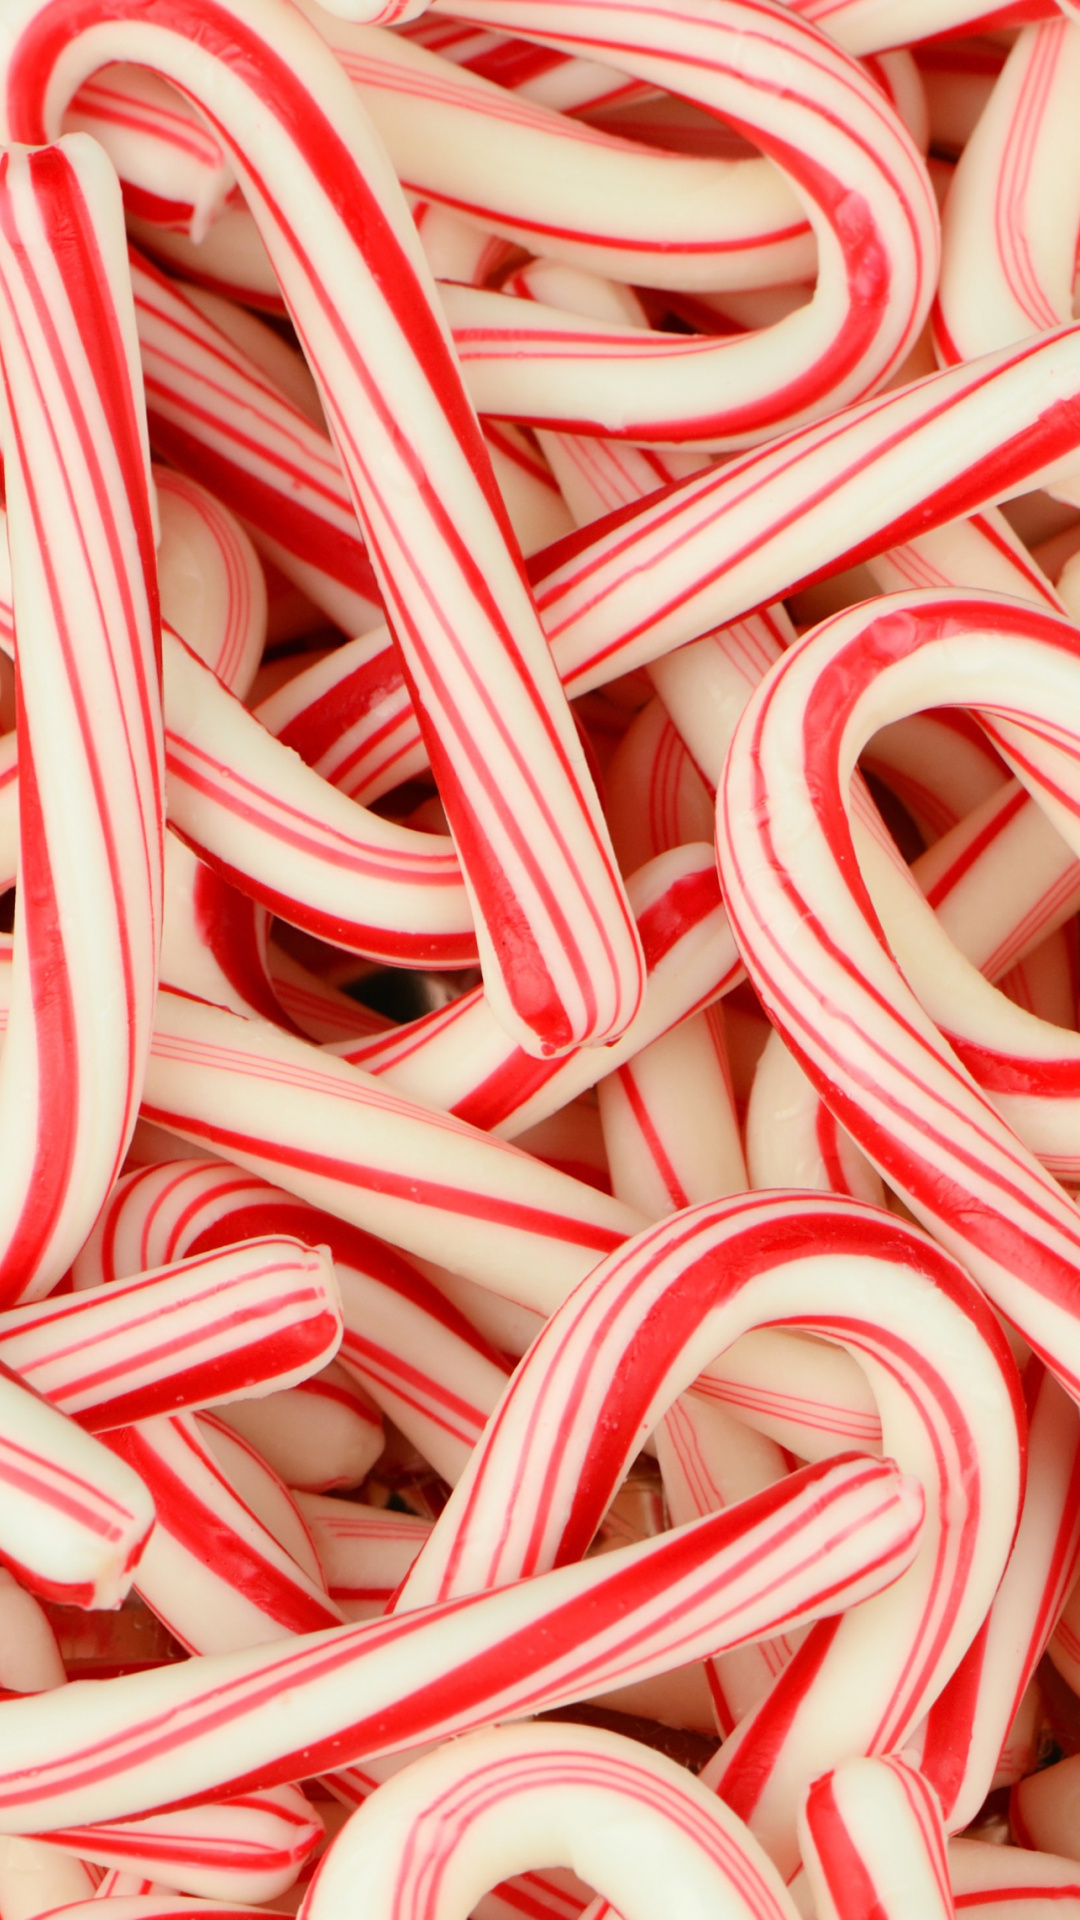 Colorful candy canes, Tasty holiday treat, Sweet peppermint delight, Festive decoration, 1080x1920 Full HD Handy